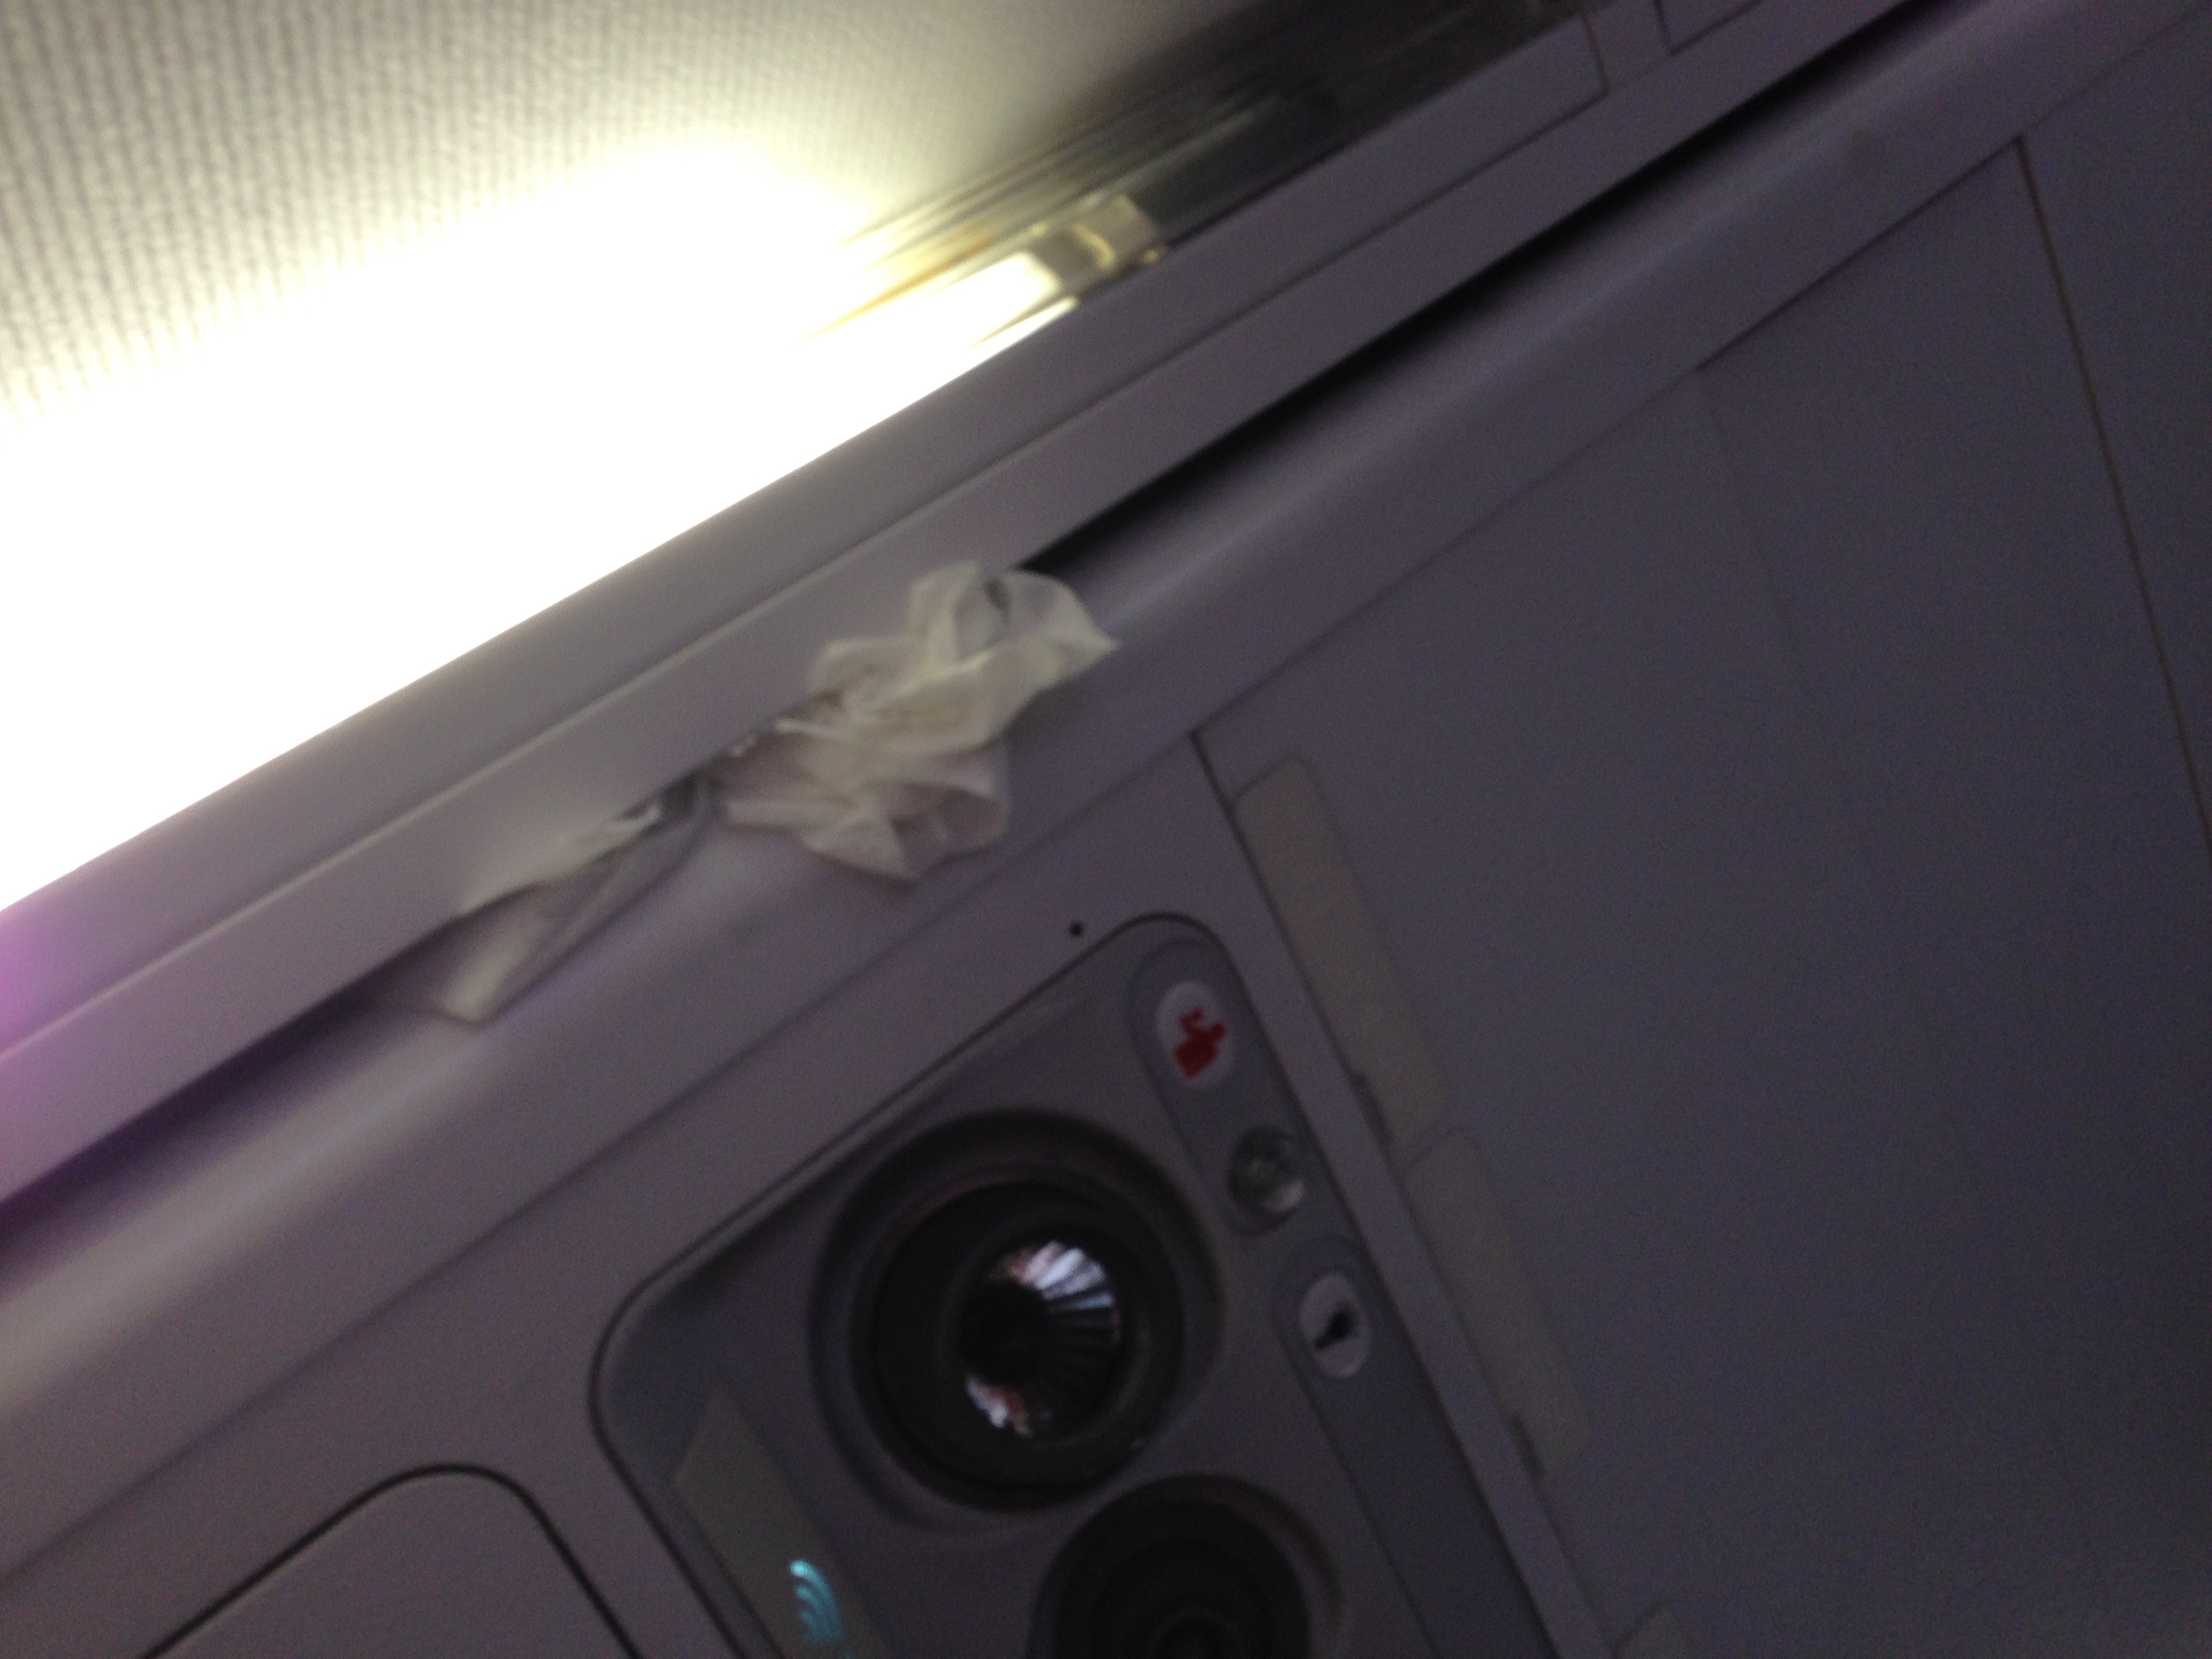 Not the "repair" people like me want to make per the flight attendant's suggestion. Not reassuring Delta!